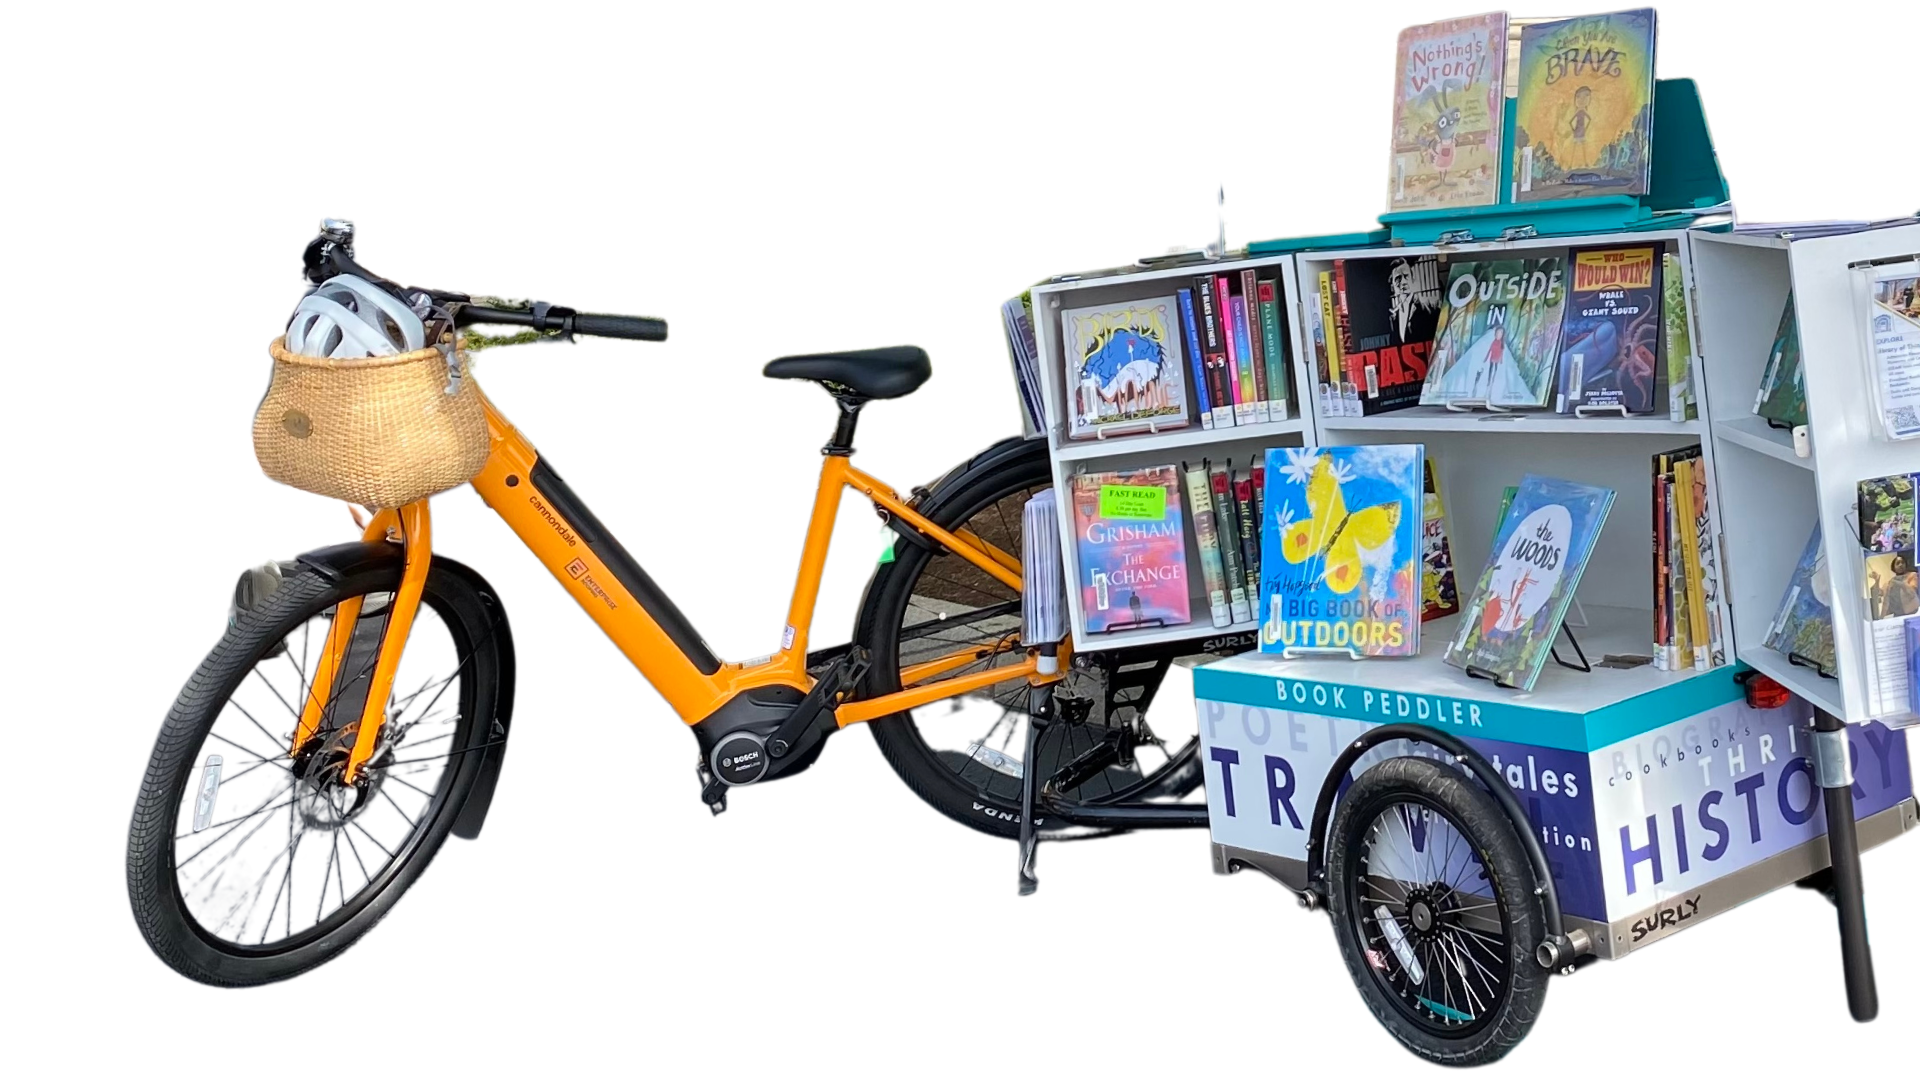 Orange electric bicycle and the "book peddler" wooden box filled with books